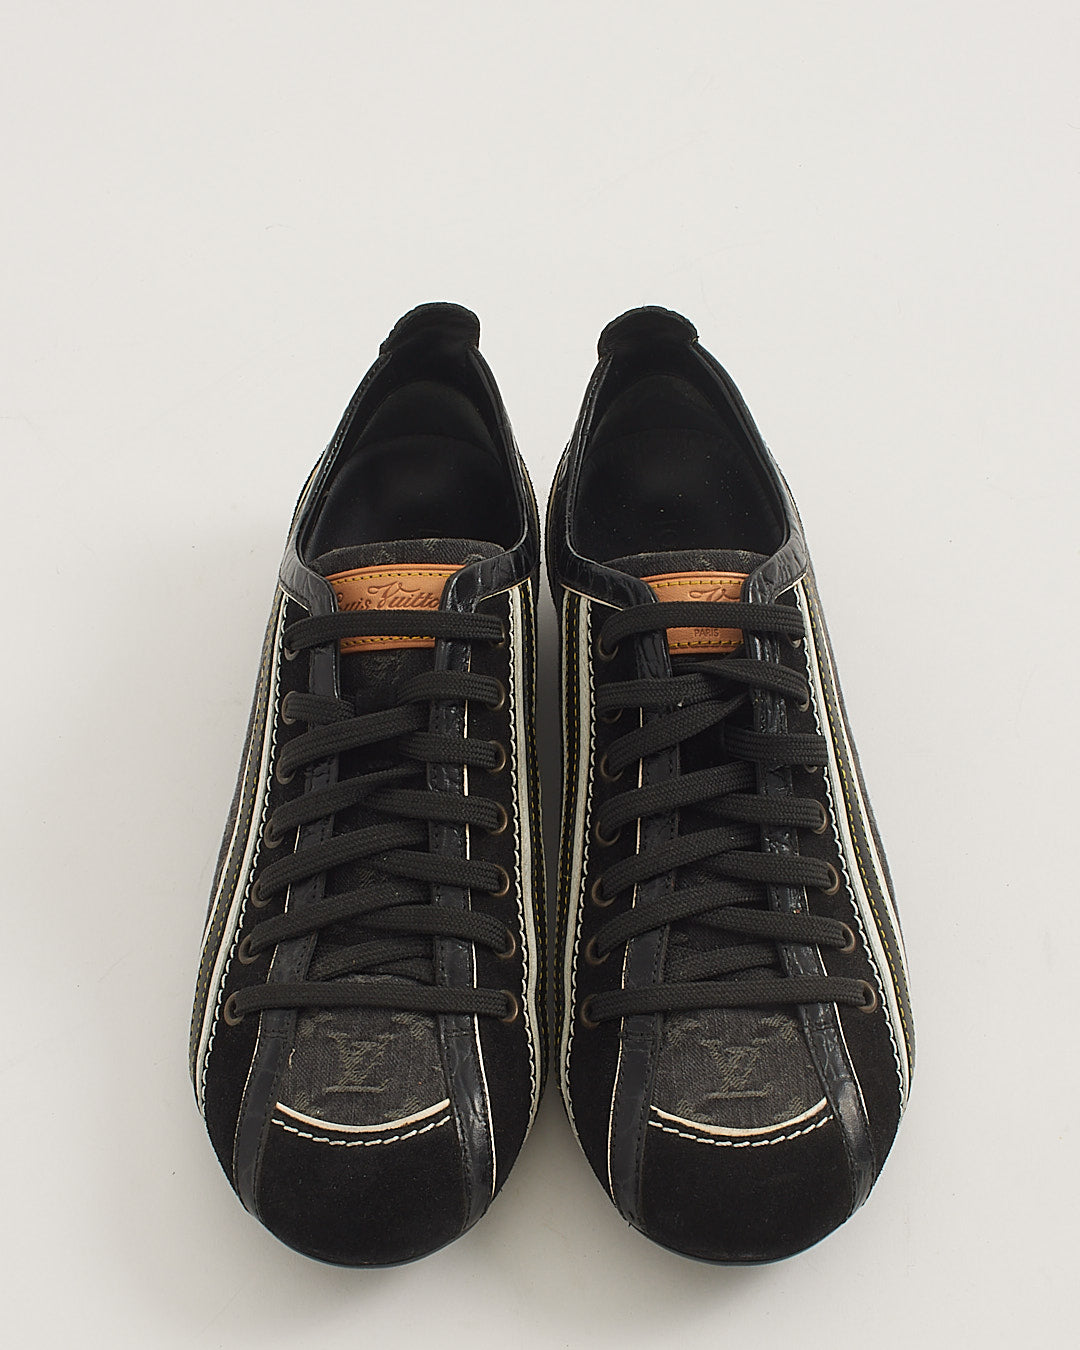 Louis Vuitton Black and White Monogram Denim and Suede Trim Sneakers - 39